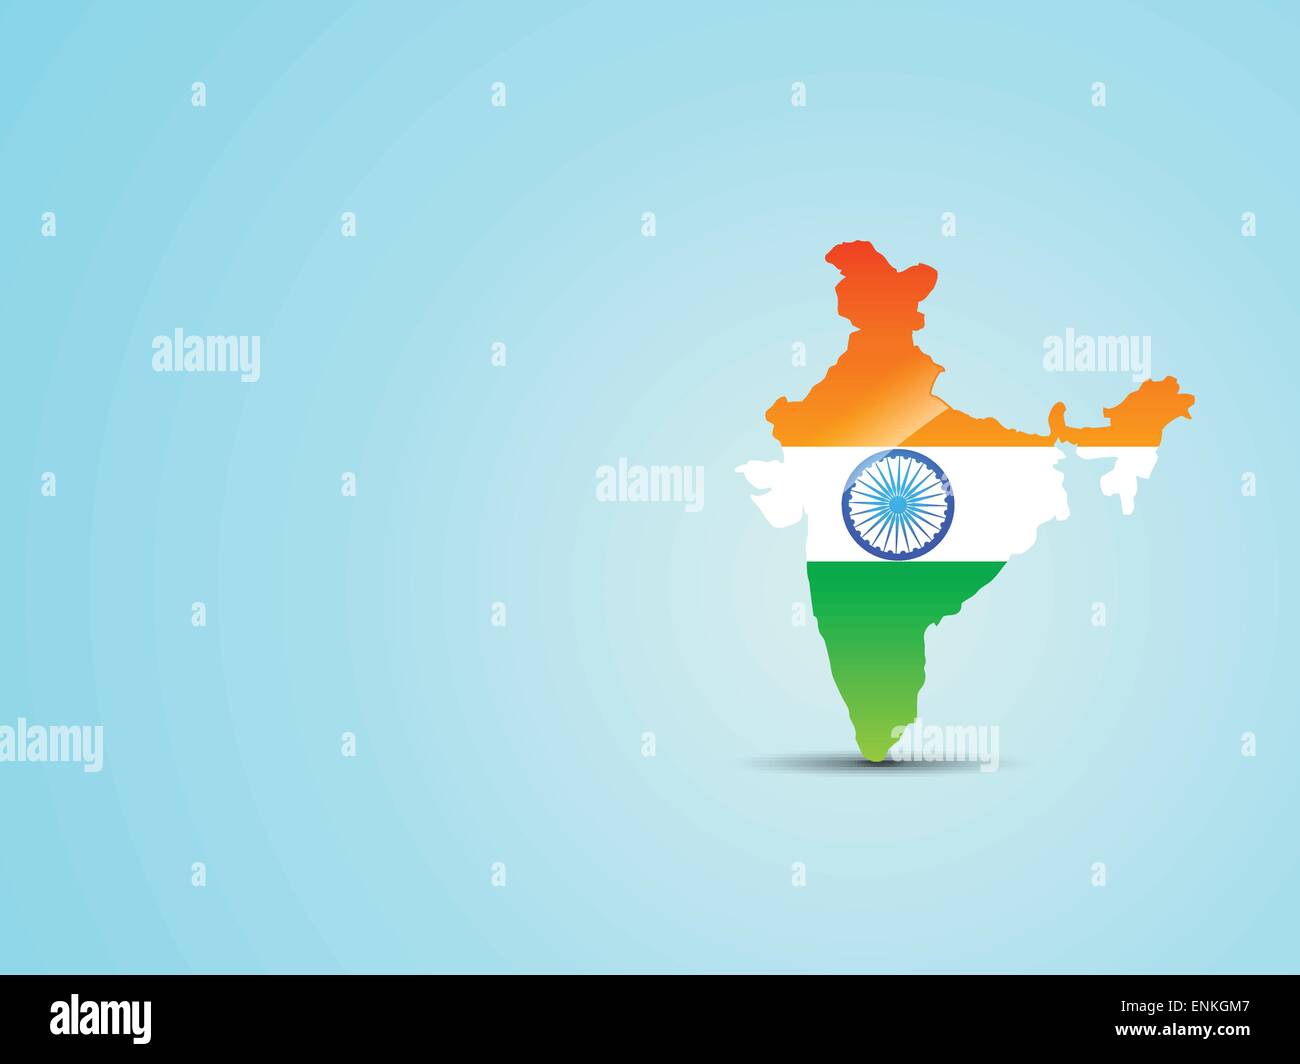 vector india map with indian flag inside and placed on light blue background Stock Vector